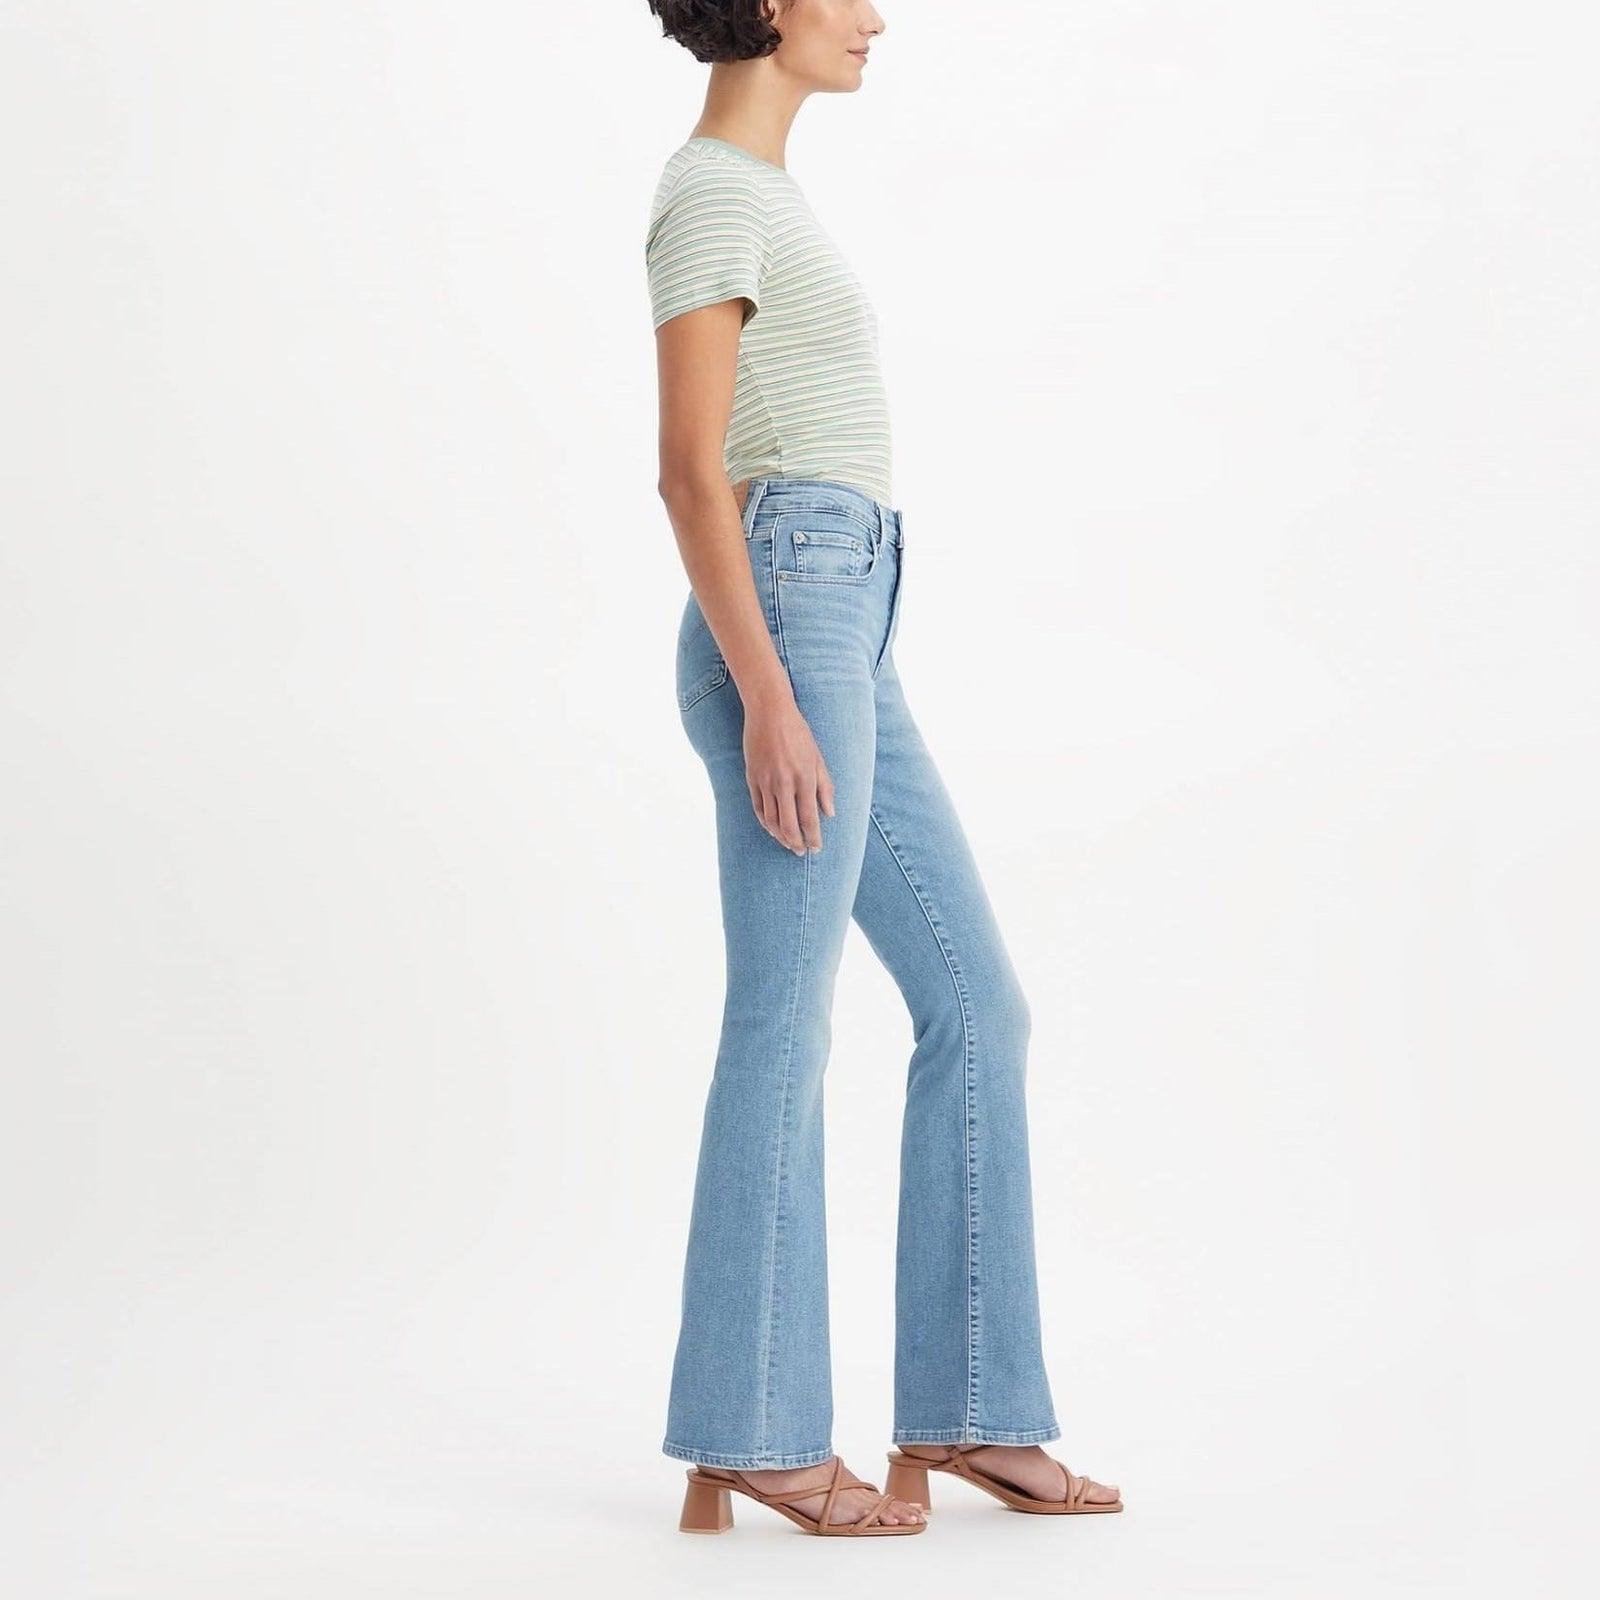 Levi's 726™ High Rise Flare Jeans in Blue Wave Light